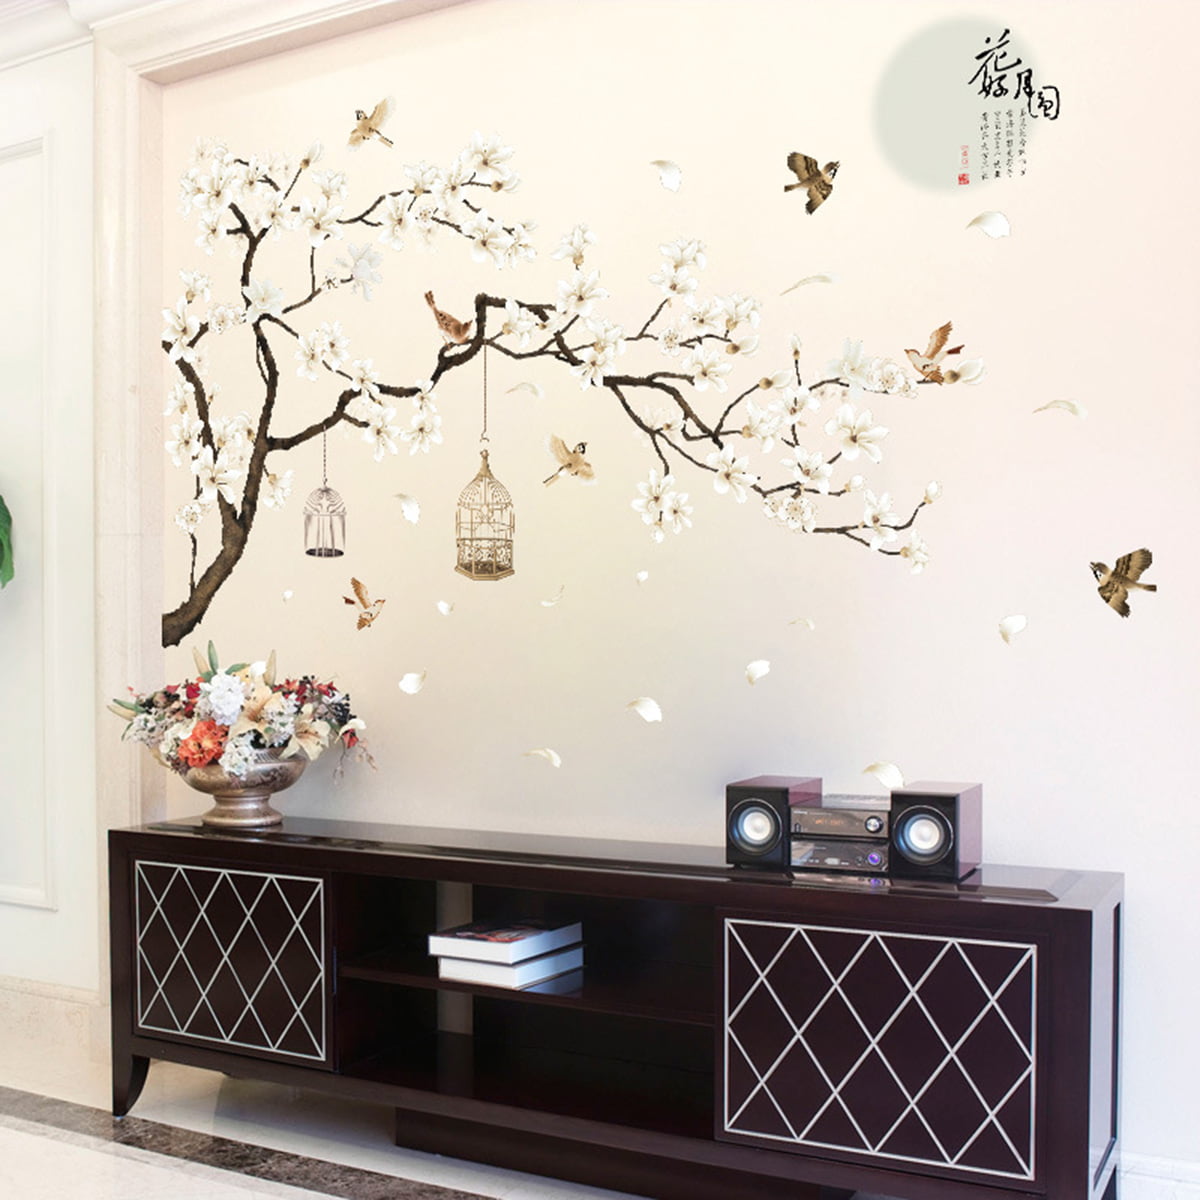 BIBITIME Pink Peach Blossom Flowers Wall Decal Sticker Birds Stickers Home Wallpaper Removable Living Dinning Room Bedroom Kitchen Art Picture Murals,DIY Size 66.93 33.46 in 